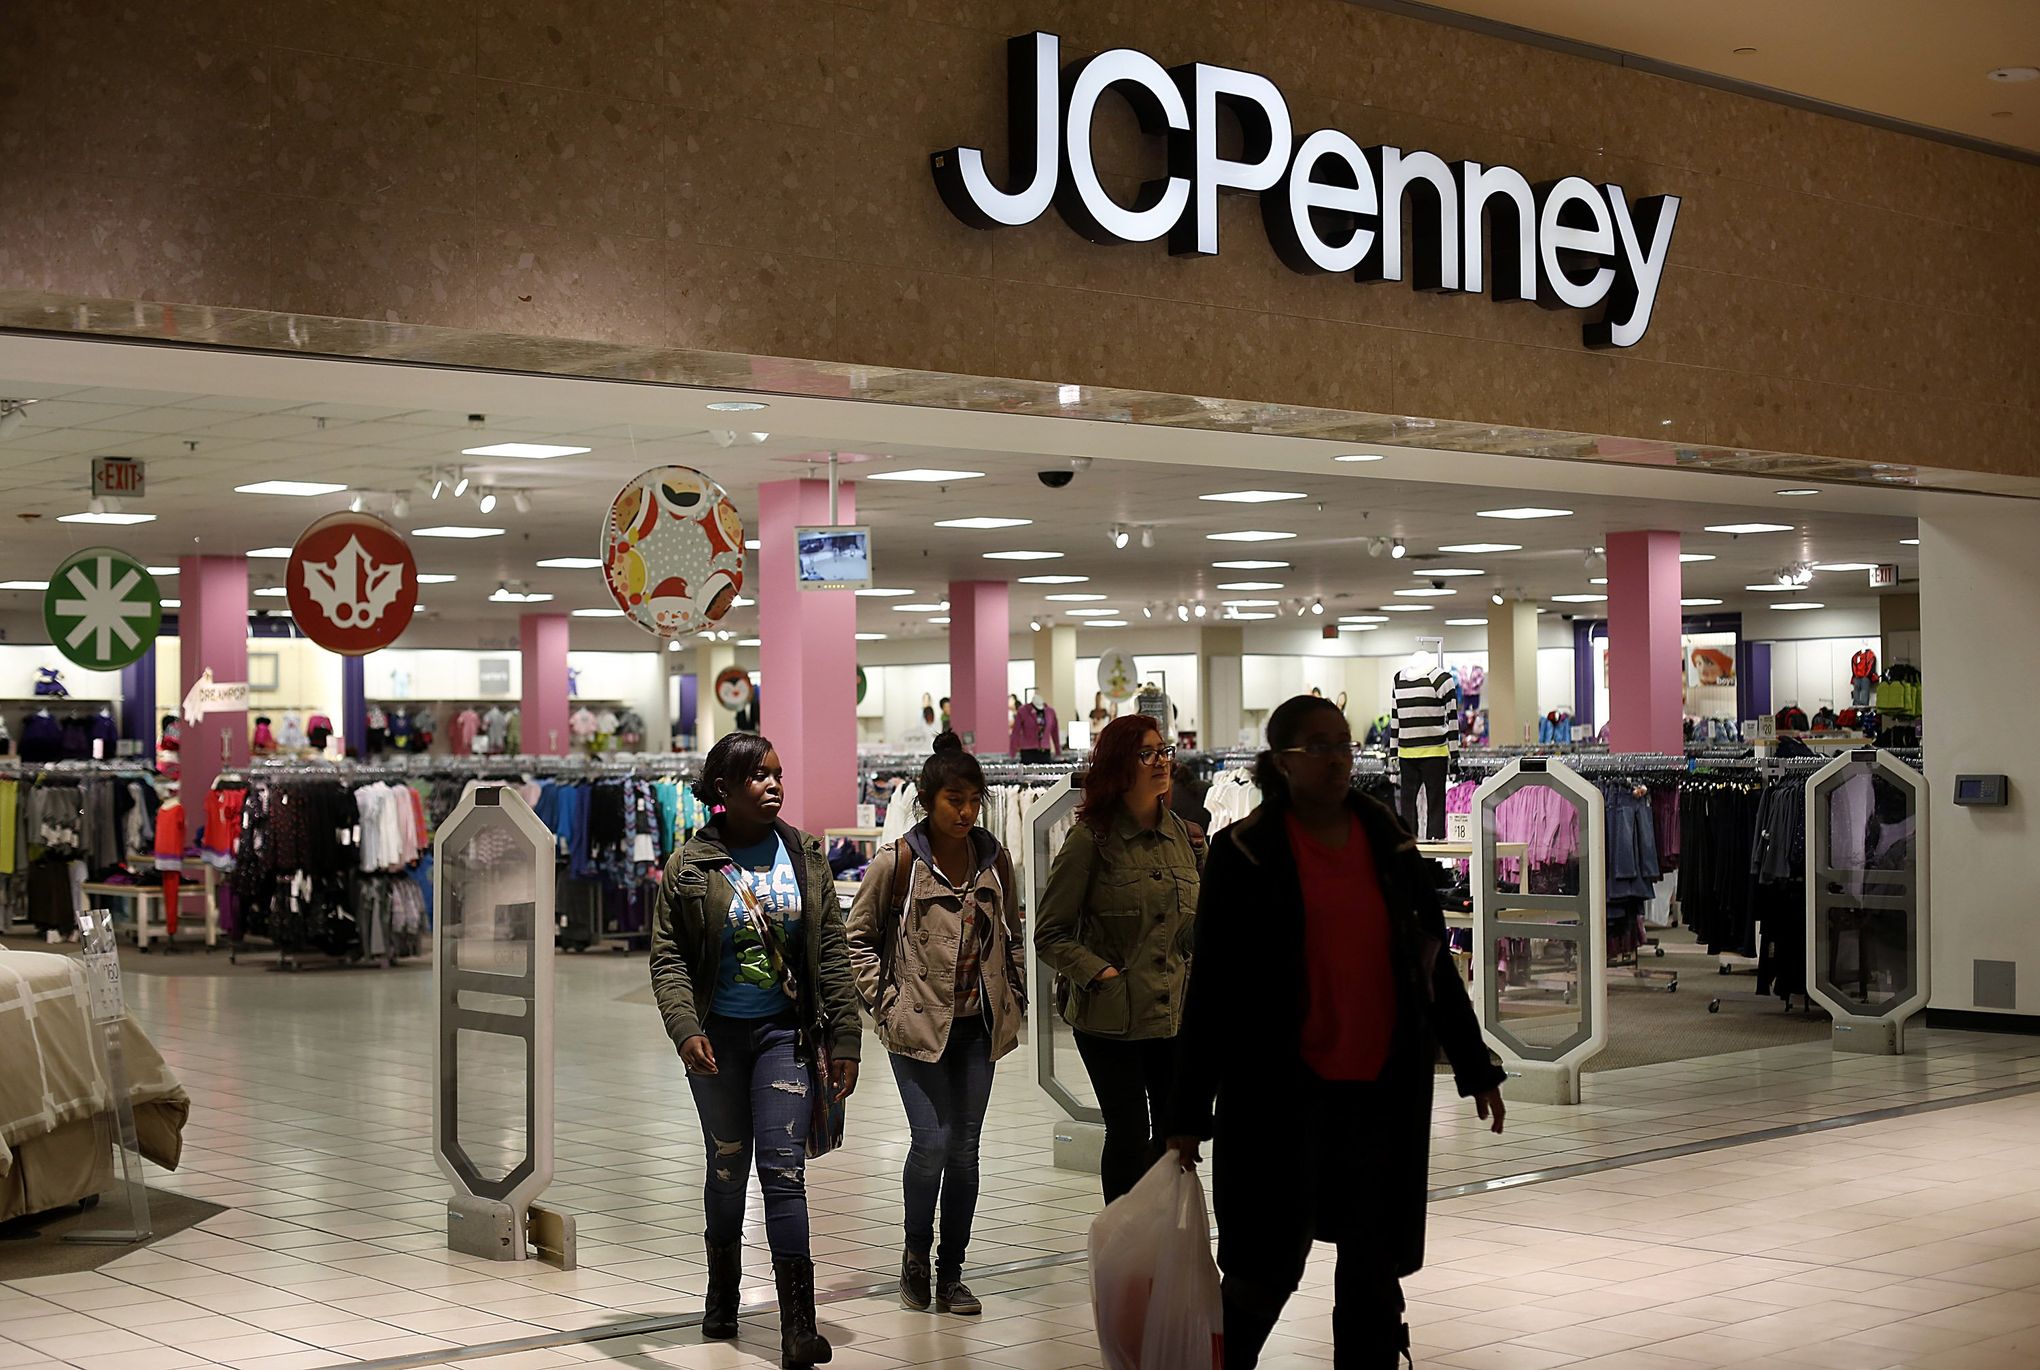 Pin on JC Penney